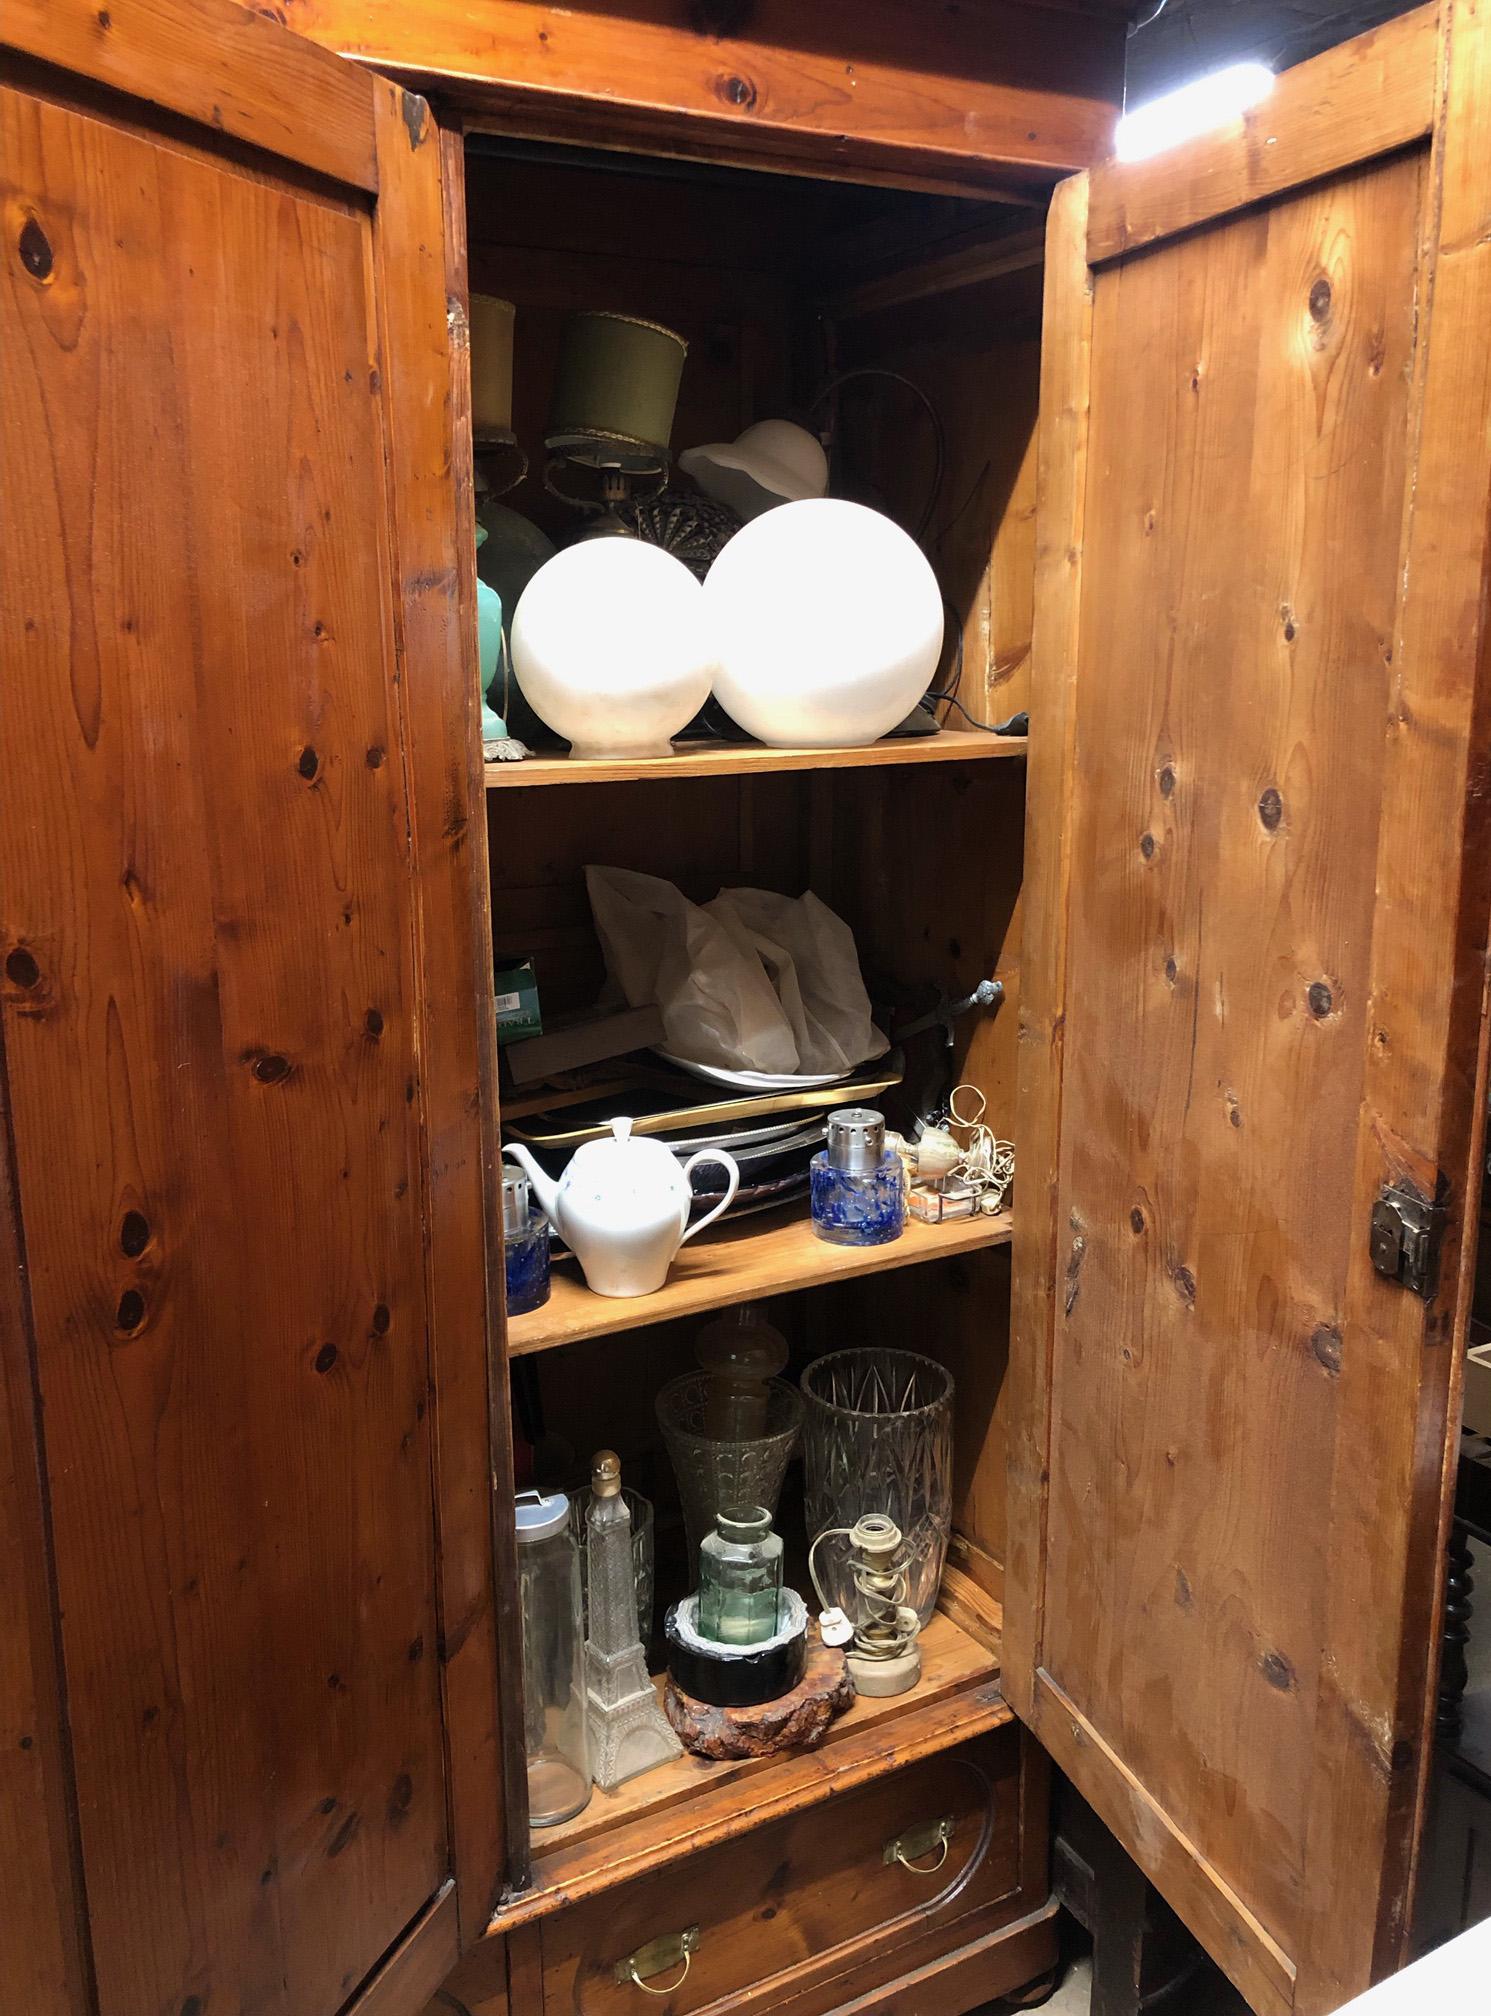 Italian wardrobe in original honey-colored solid pine handmade. 
It has three doors, three drawers at the bottom. 
In the area on the left it has a rod for hanging clothes and on the left two shelves for storing folded clothes.
Given the weight